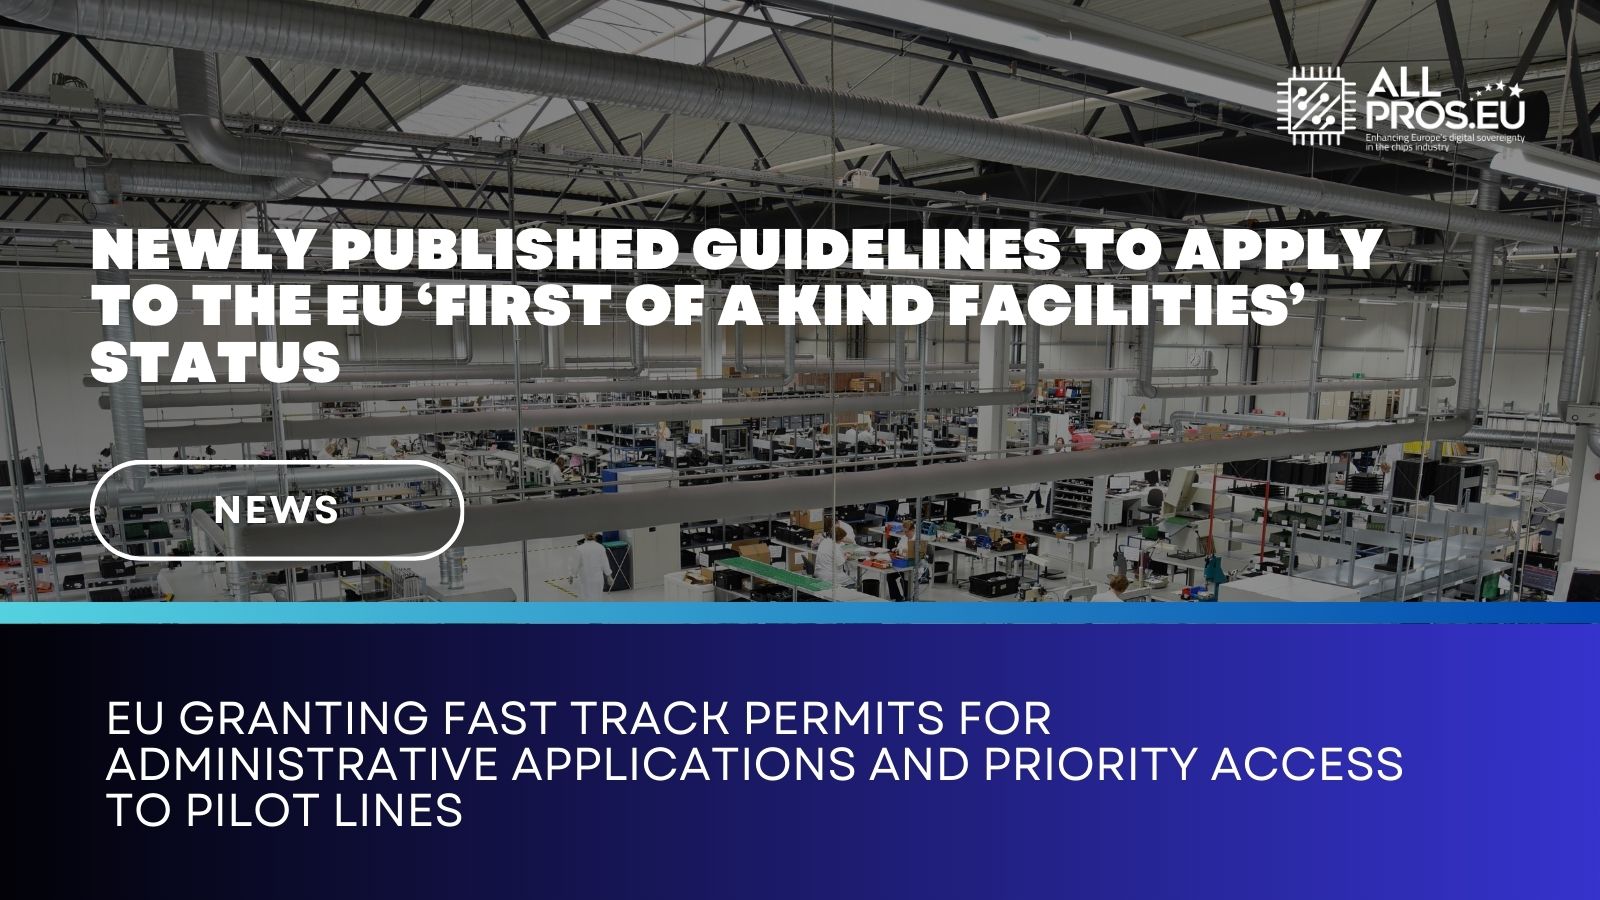 Newly published guidelines to apply to the EU ‘first of a kind facilities’ status